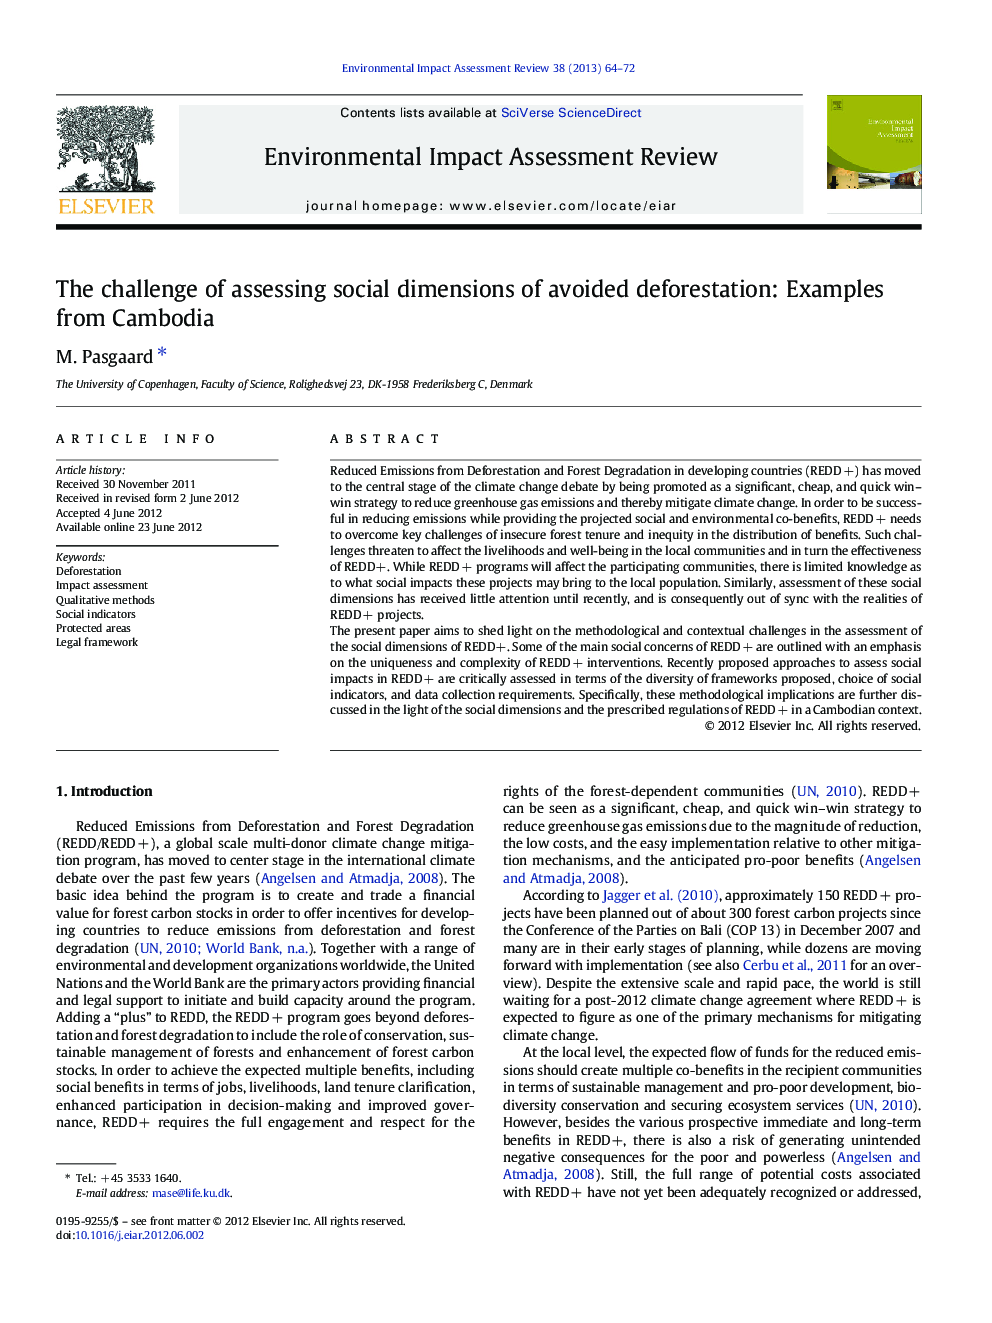 The challenge of assessing social dimensions of avoided deforestation: Examples from Cambodia